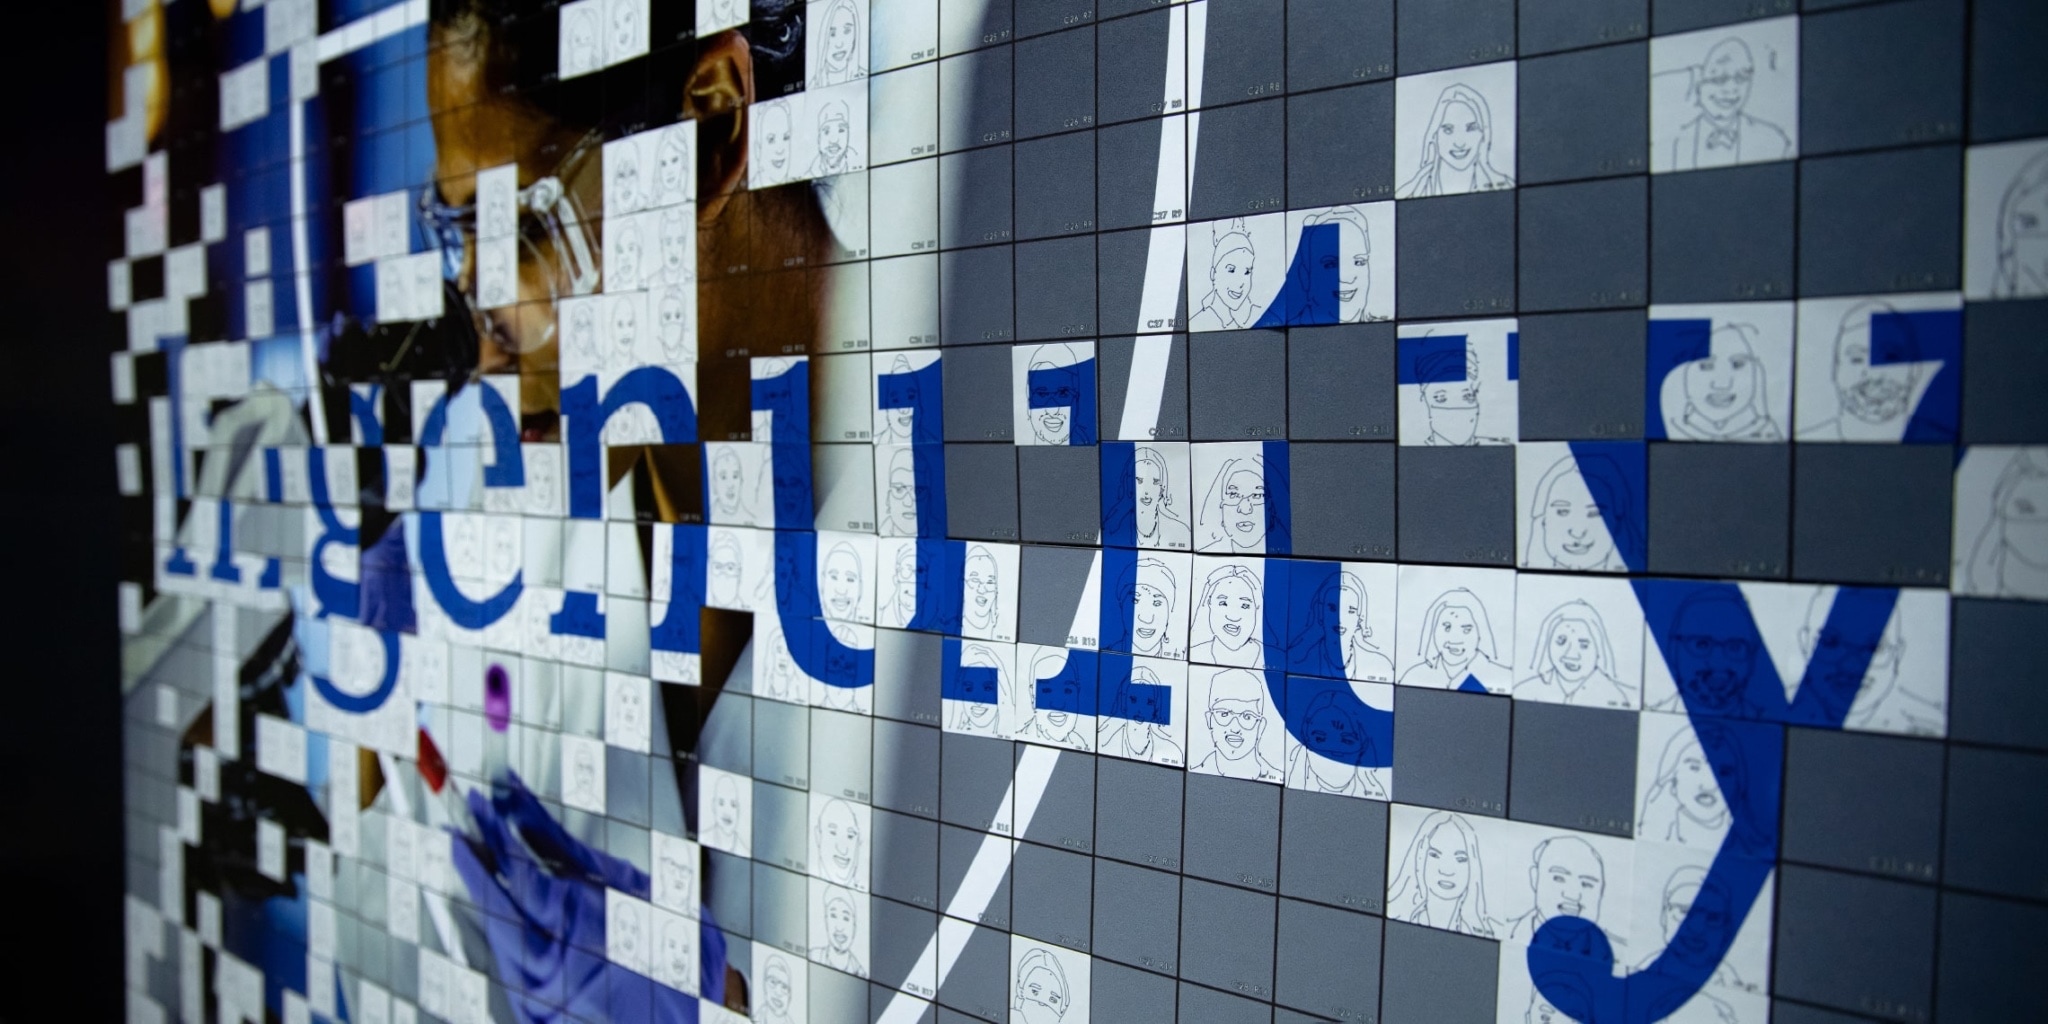 An image of the word 'ingenuity' on a tiled wall.